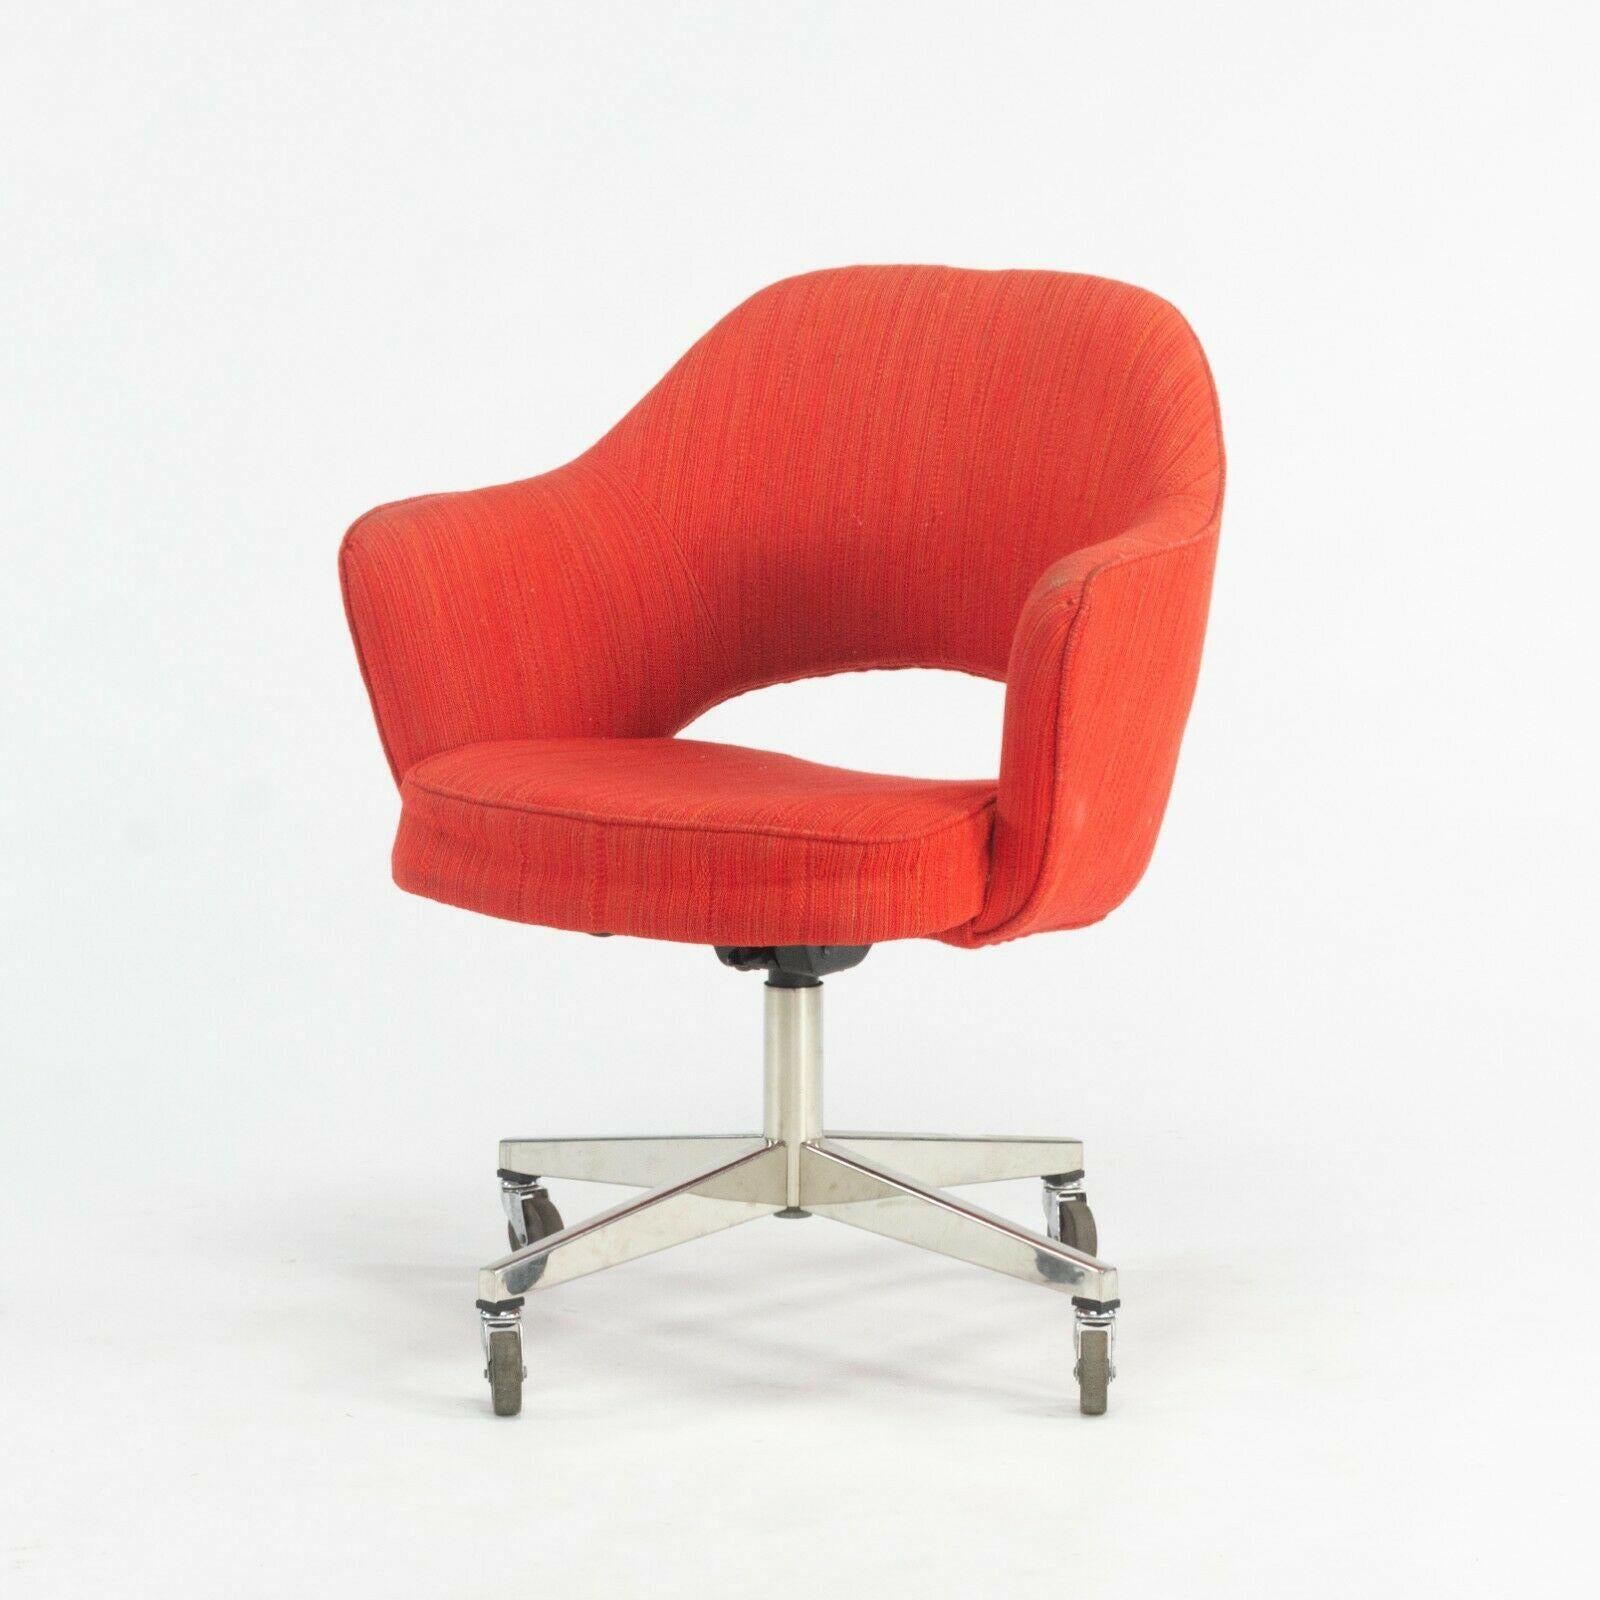 1974 Eero Saarinen for Knoll Rolling Executive Office Chairs Original Red Fabric For Sale 3